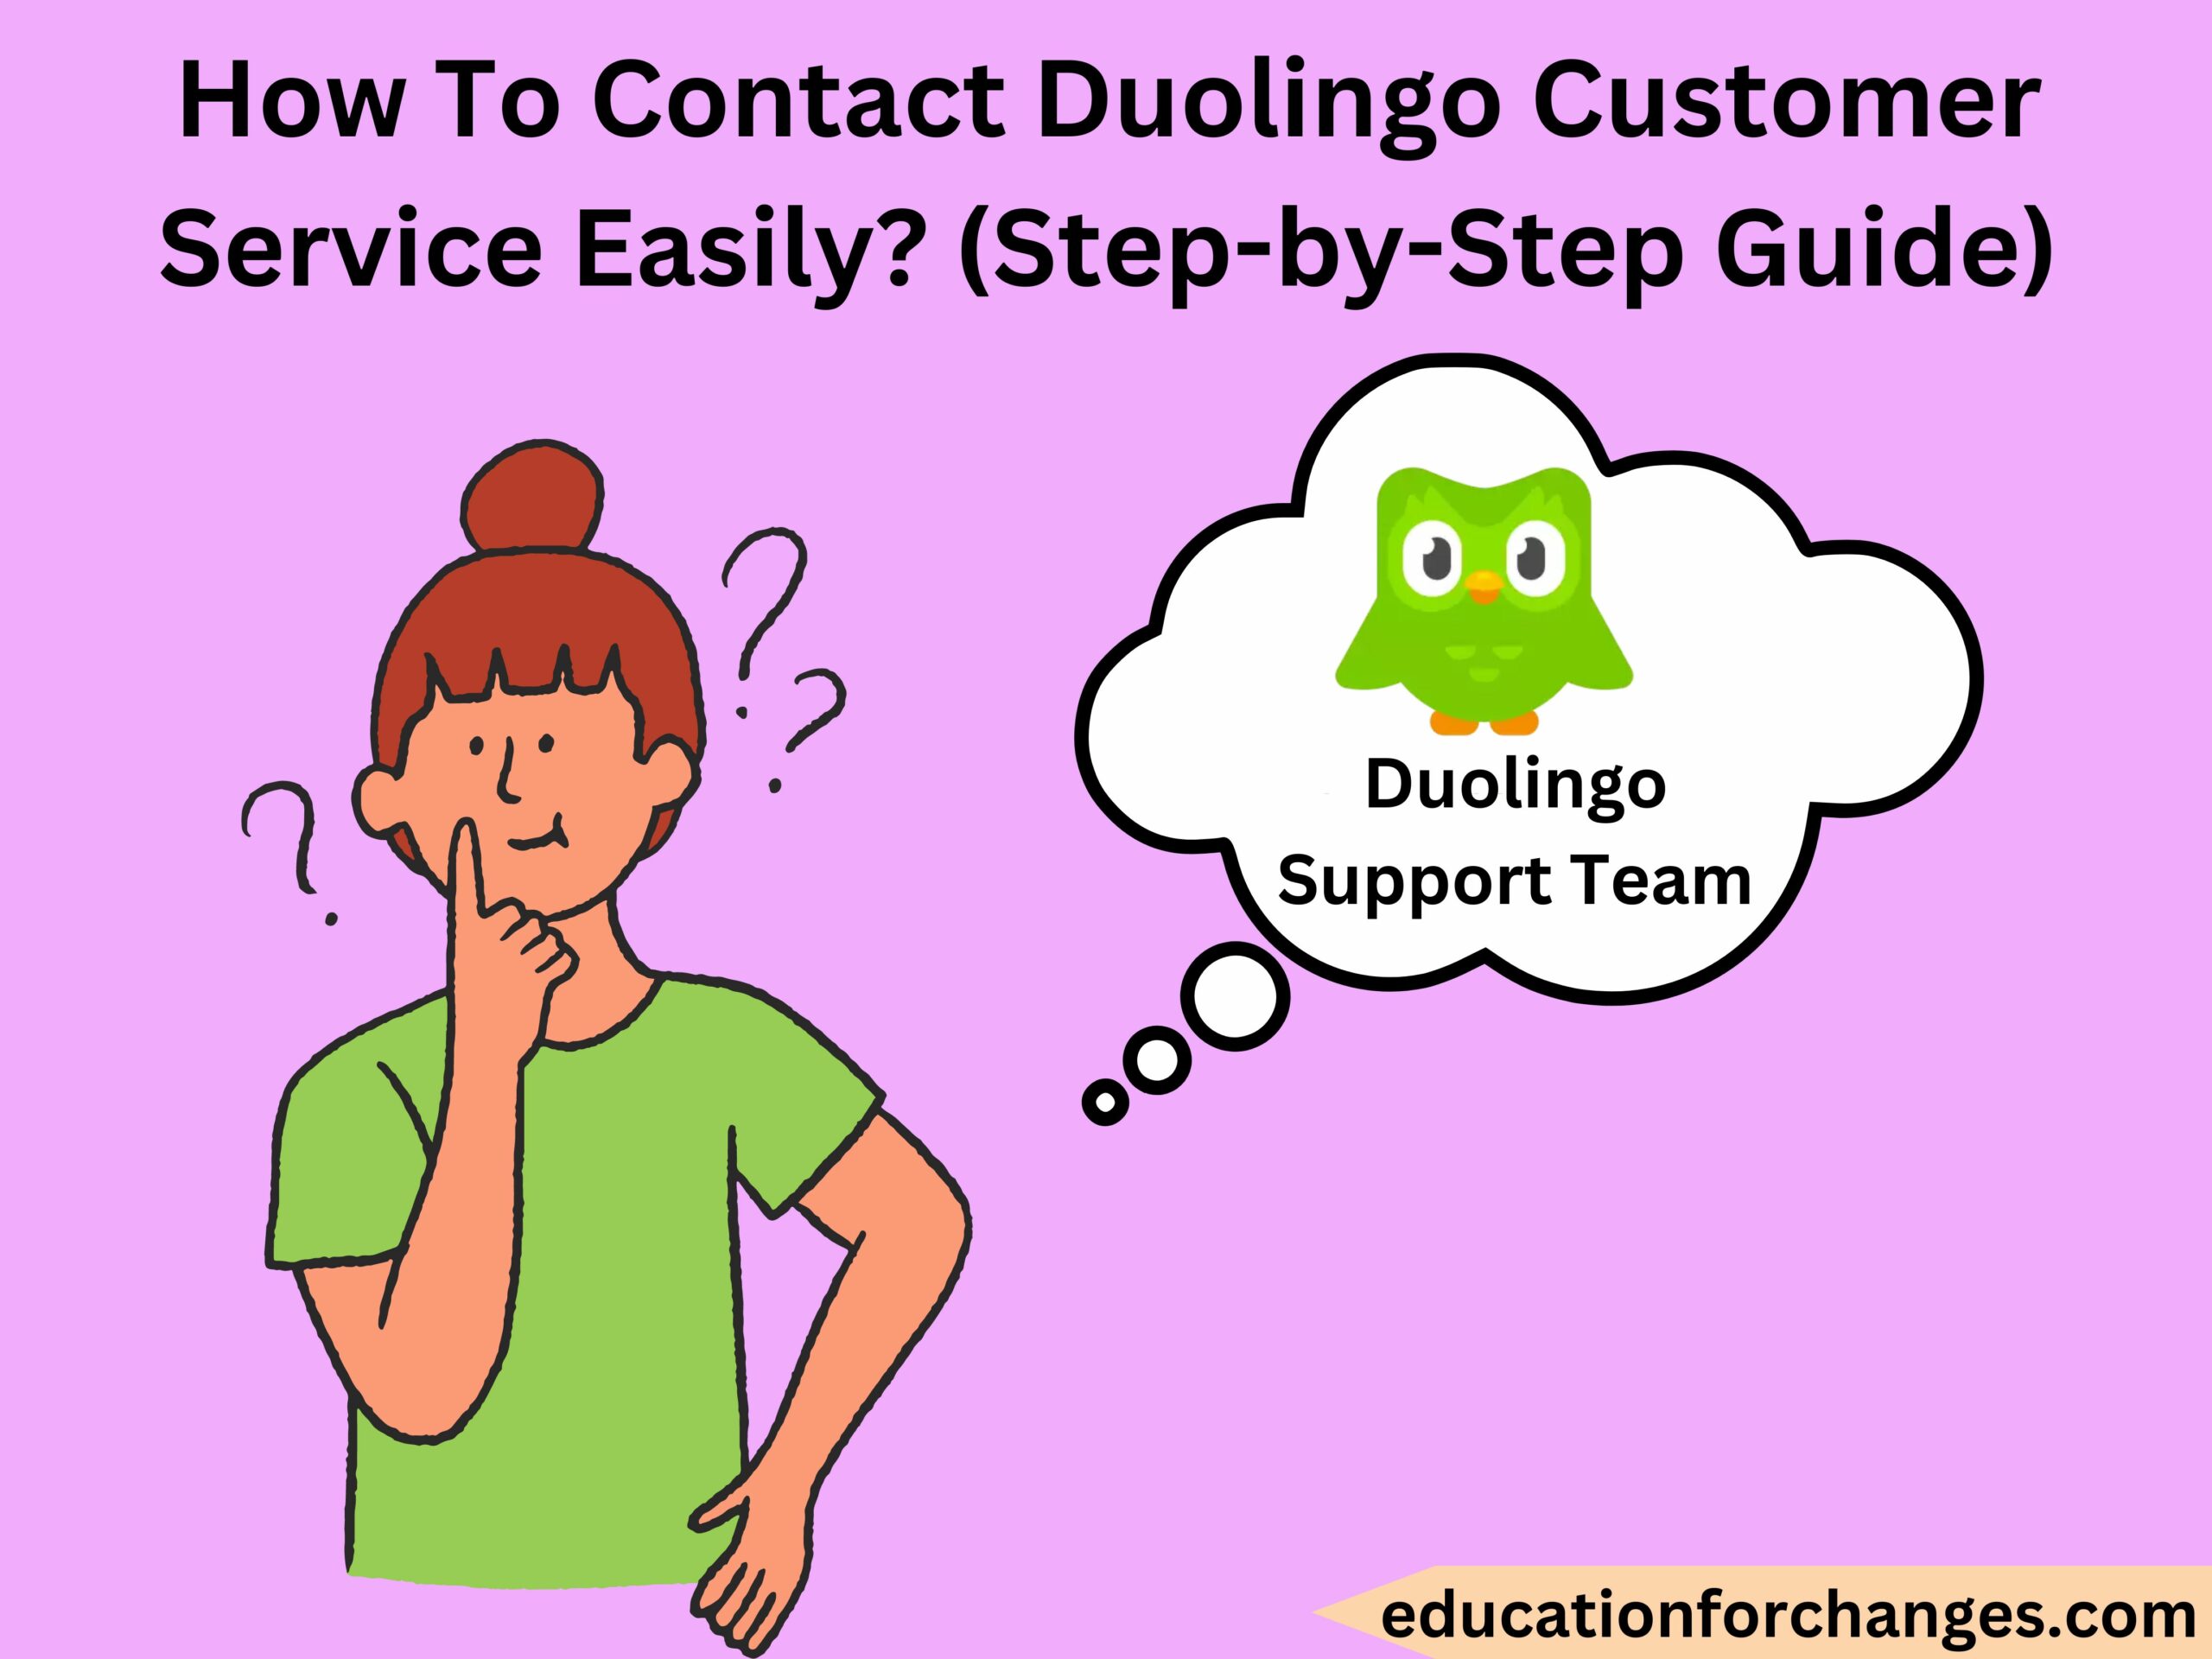 How To Contact Duolingo Customer Service Easily (Step-by-Step Guide)